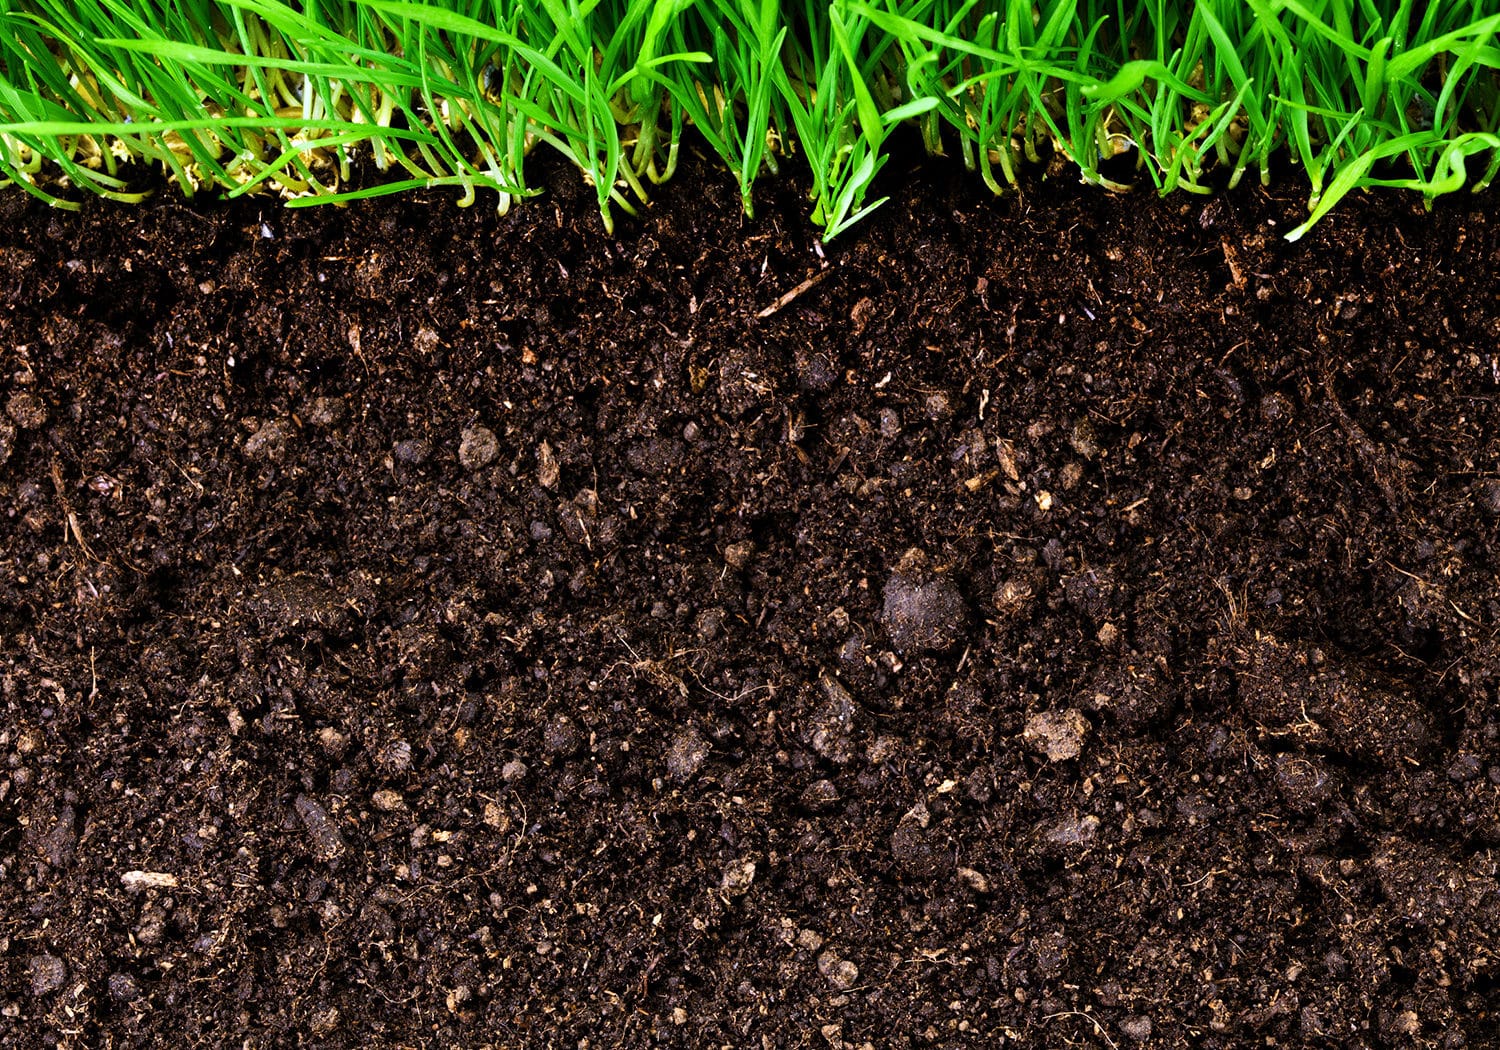 Importance of soil organic carbon to agriculture